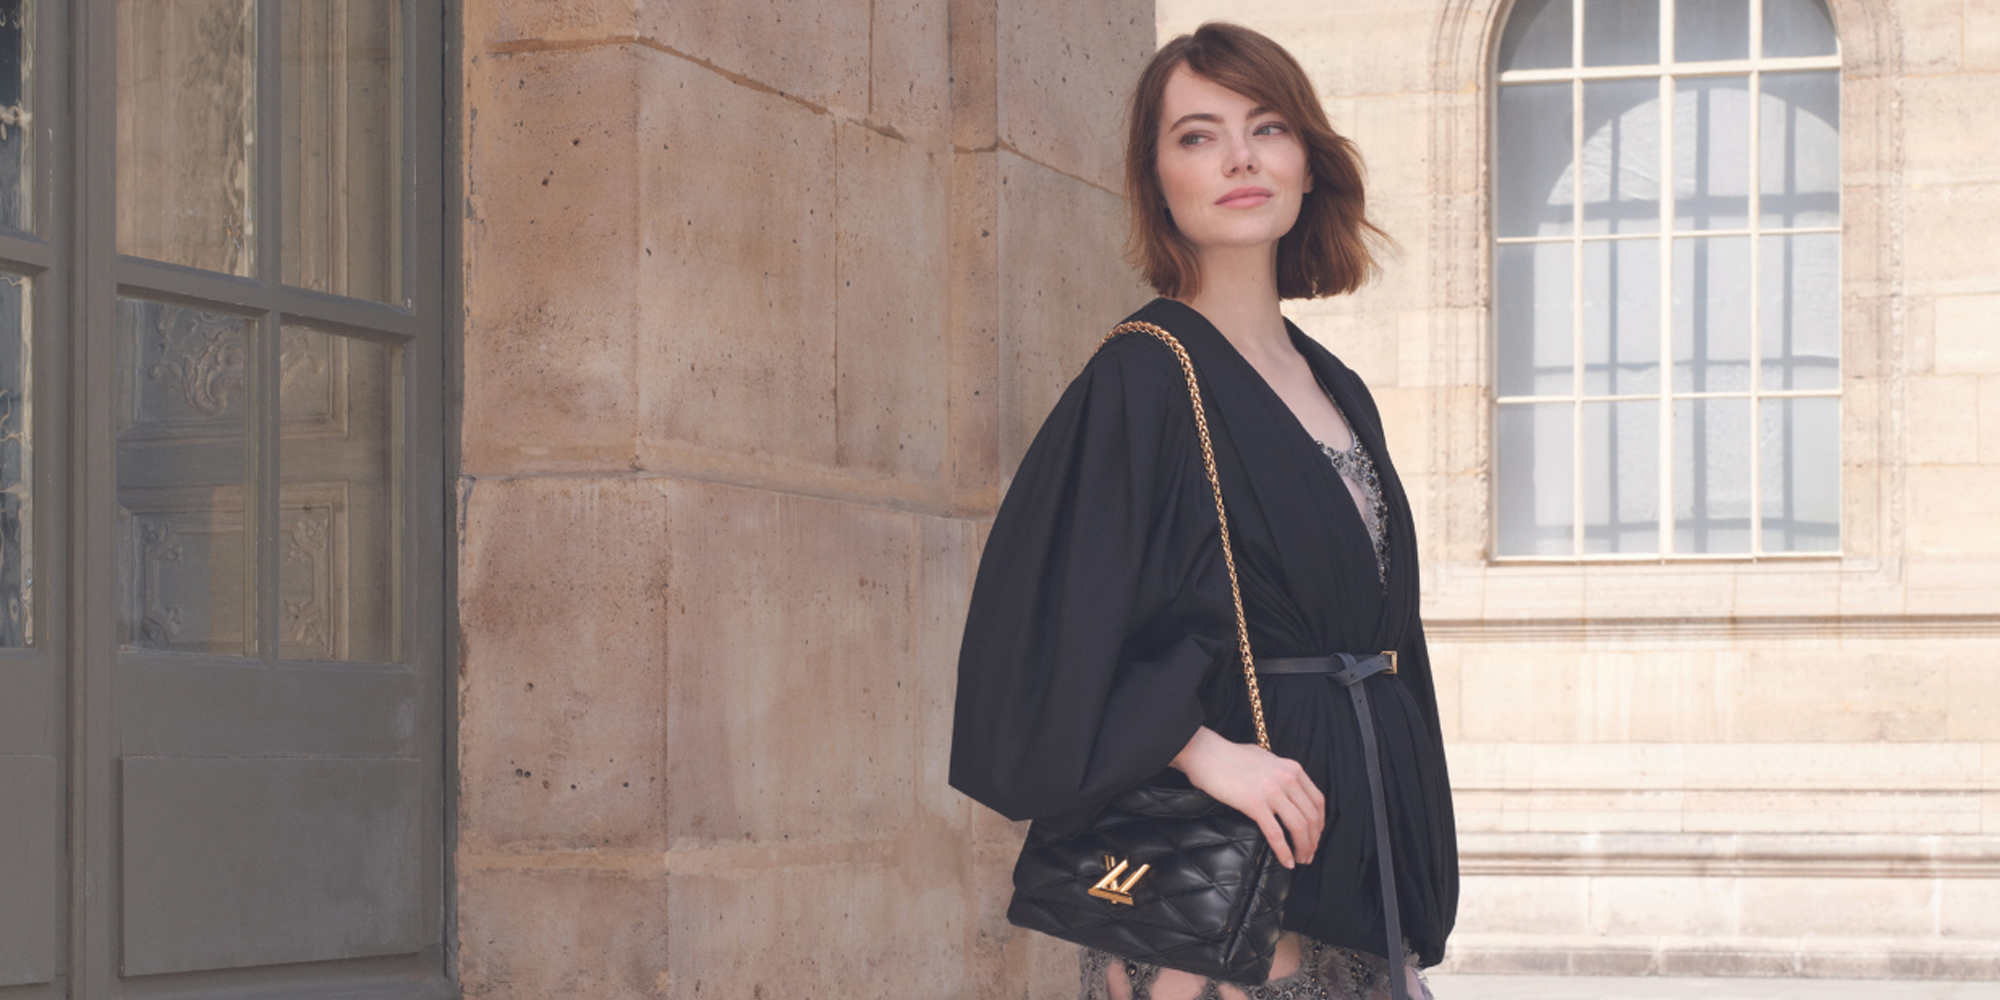 Les Parfums Louis Vuitton, the new campaign starring Emma Stone